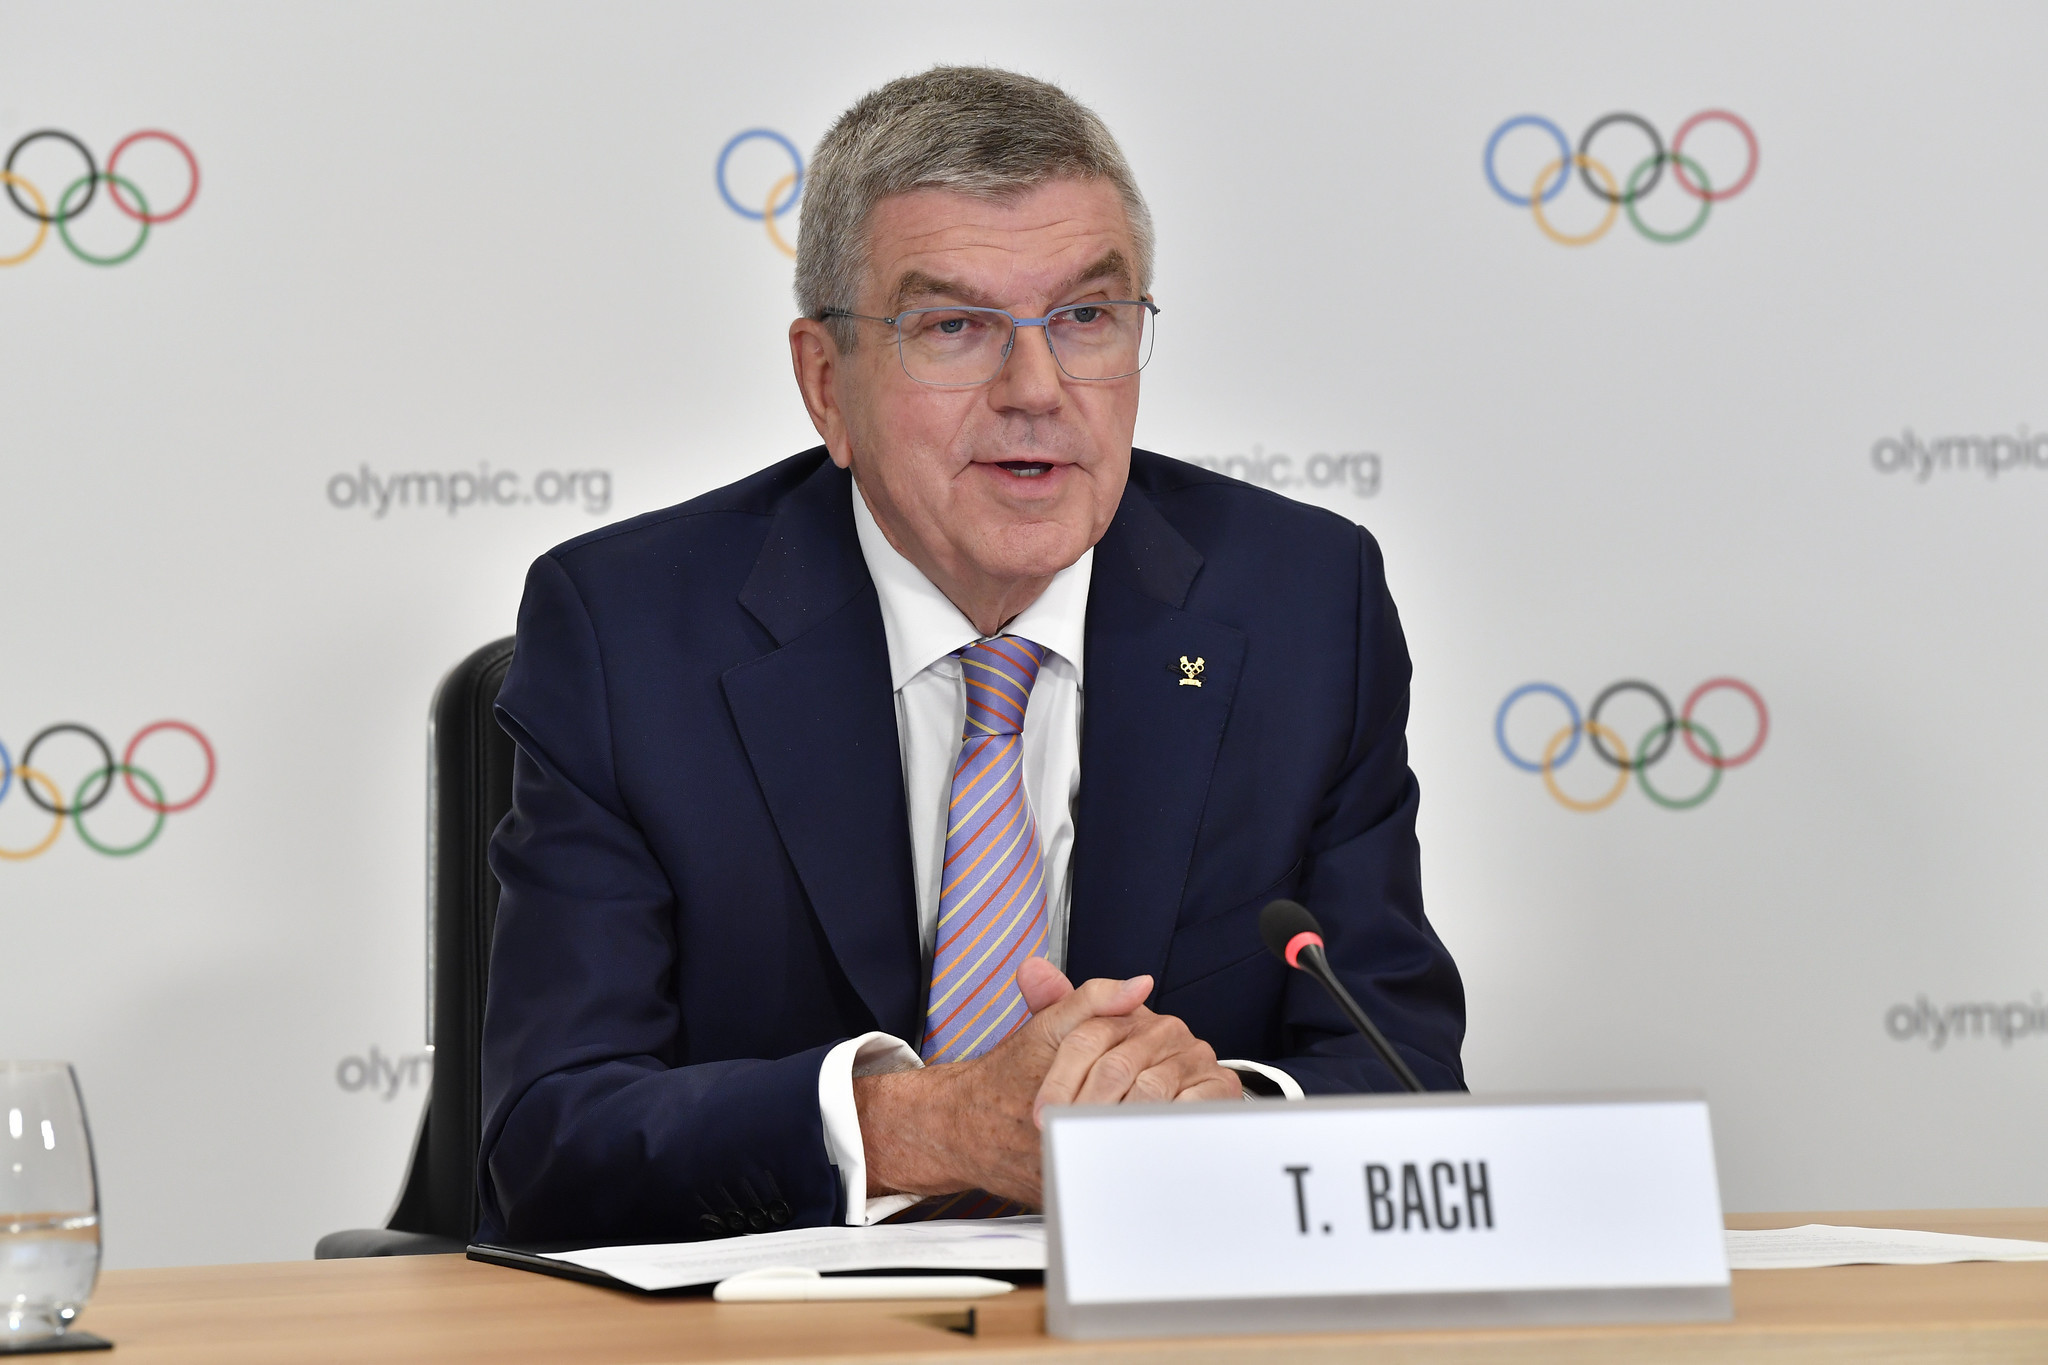 IOC President Thomas Bach said the allegations against Belarus were very concerning ©Getty Images